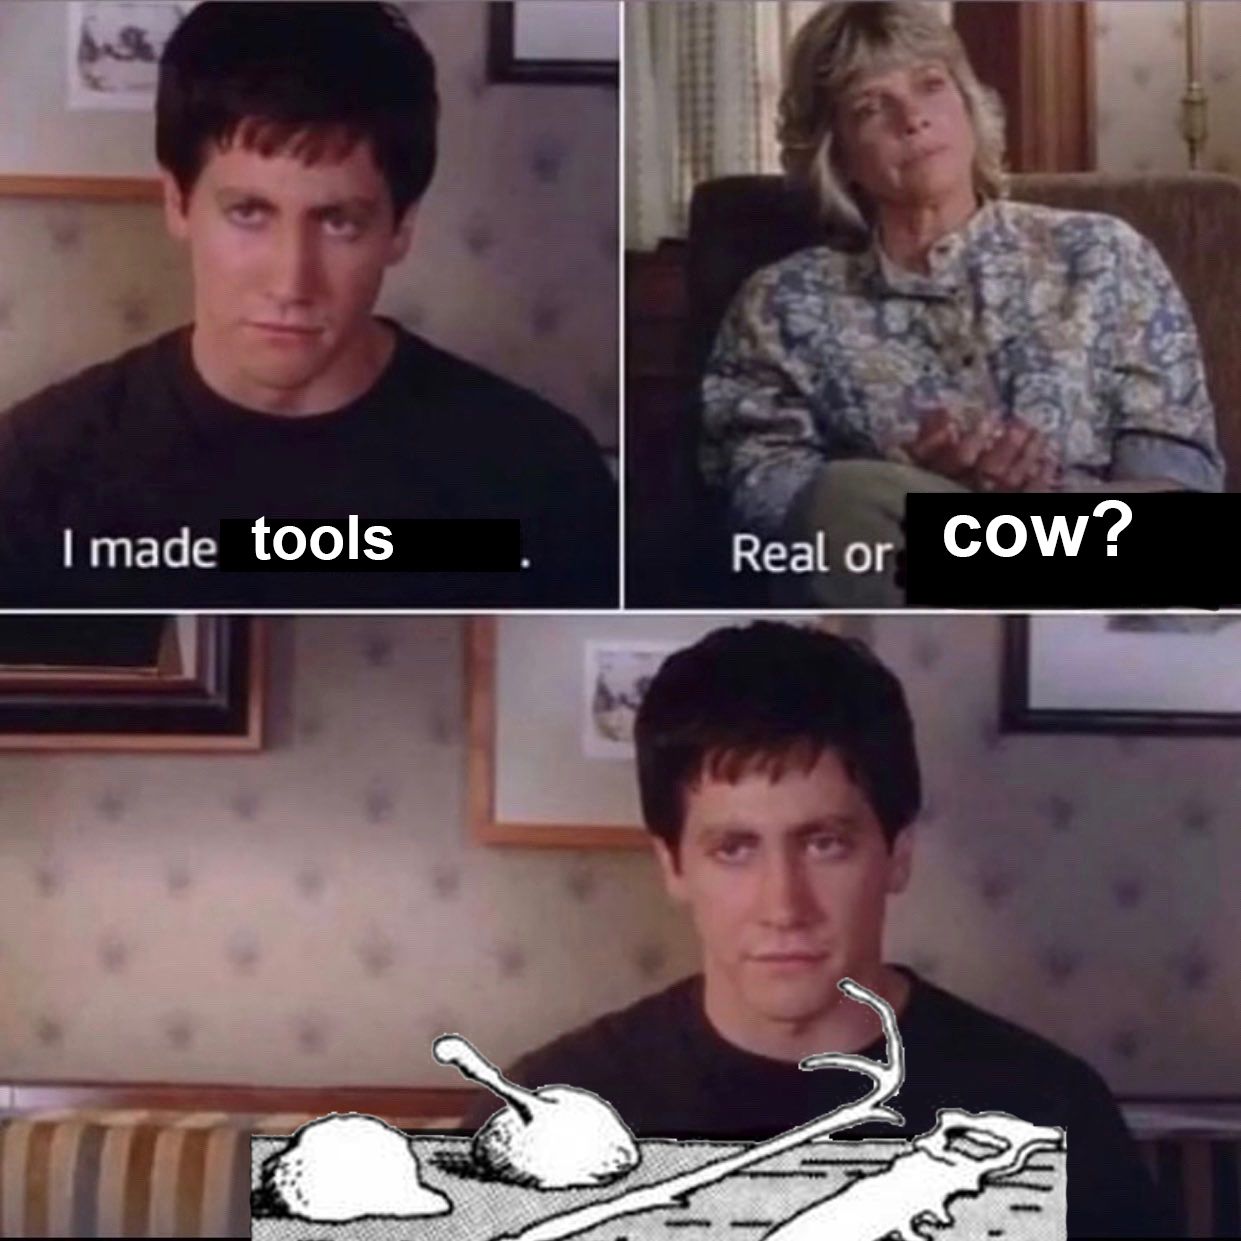 Return to... cow?